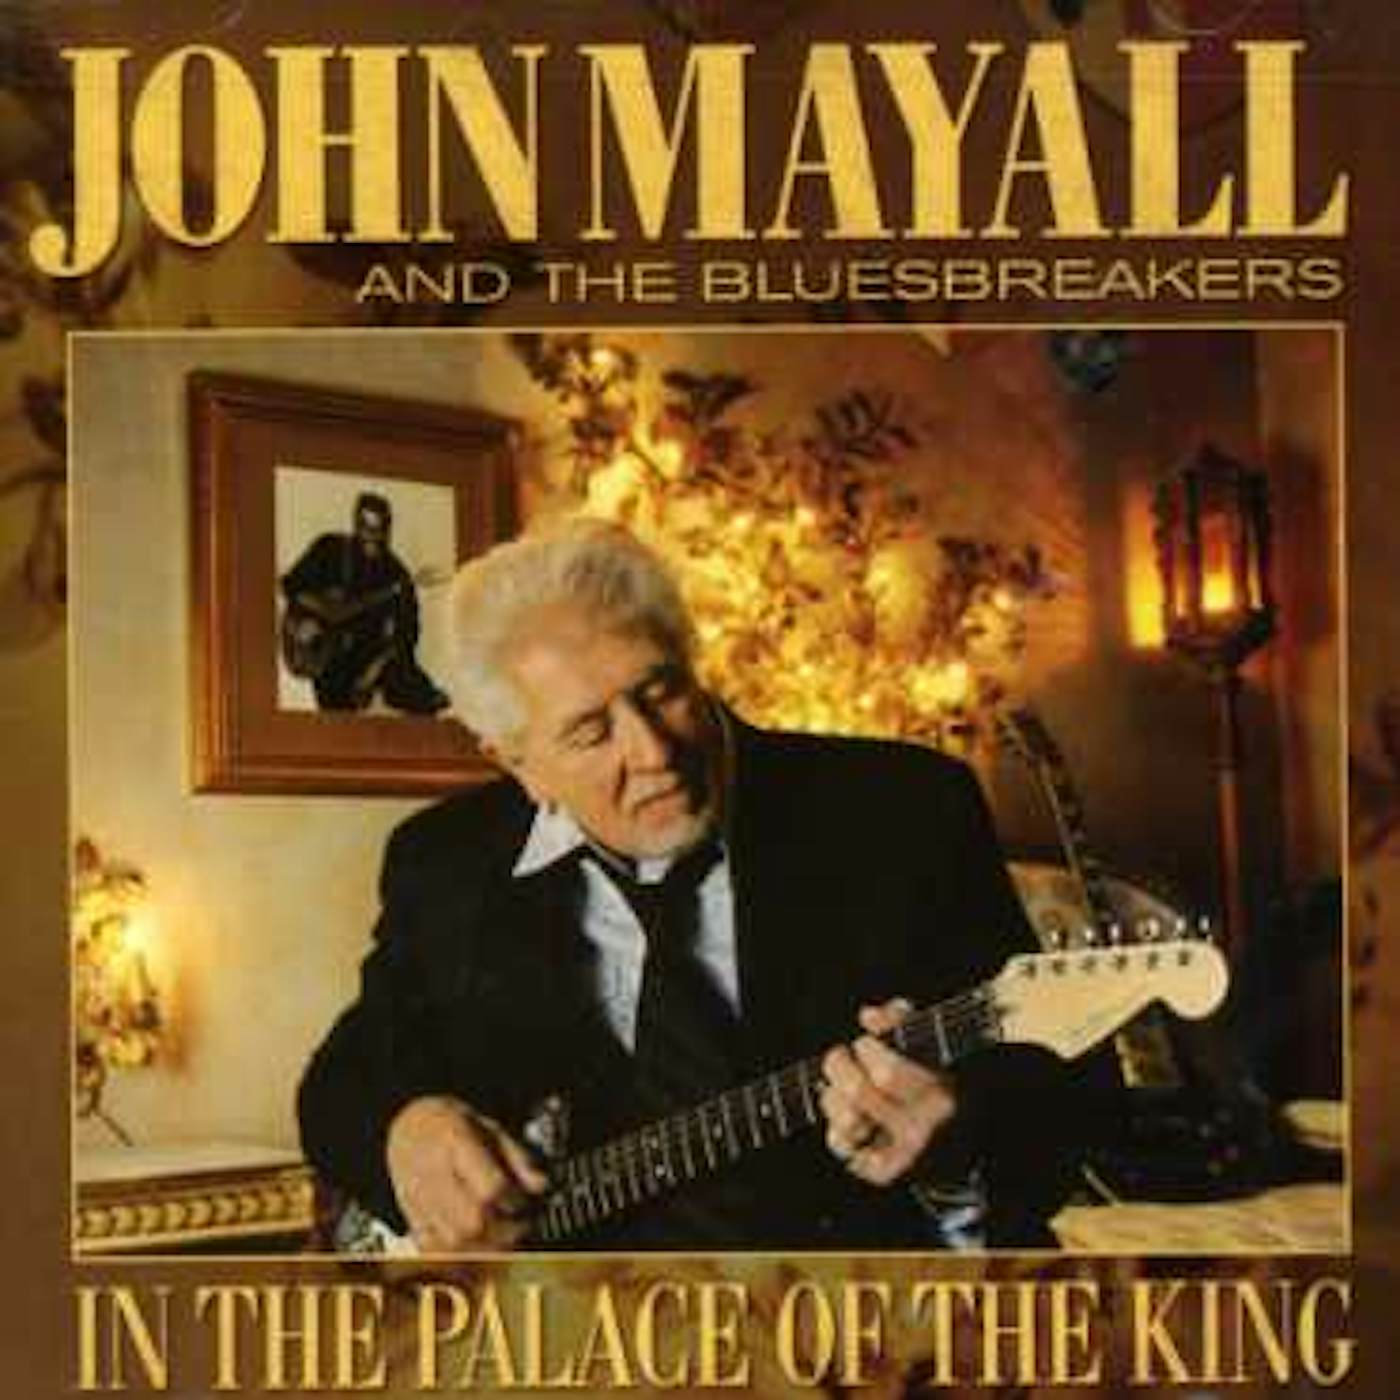 John Mayall & The Bluesbreakers IN THE PALACE OF THE KING CD